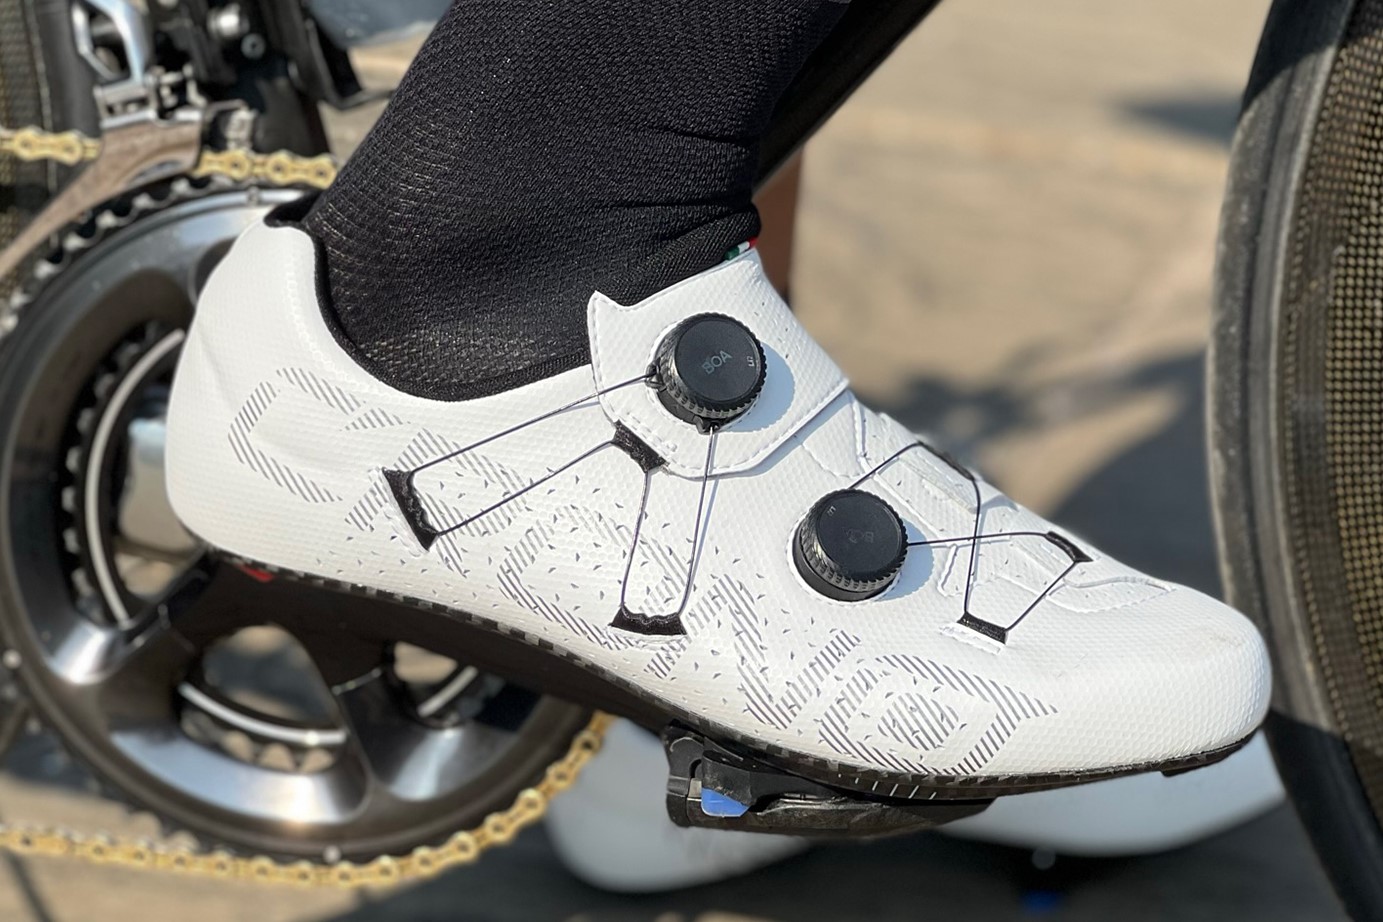 Introducing - Crono Shoes - Merlin Cycles Blog